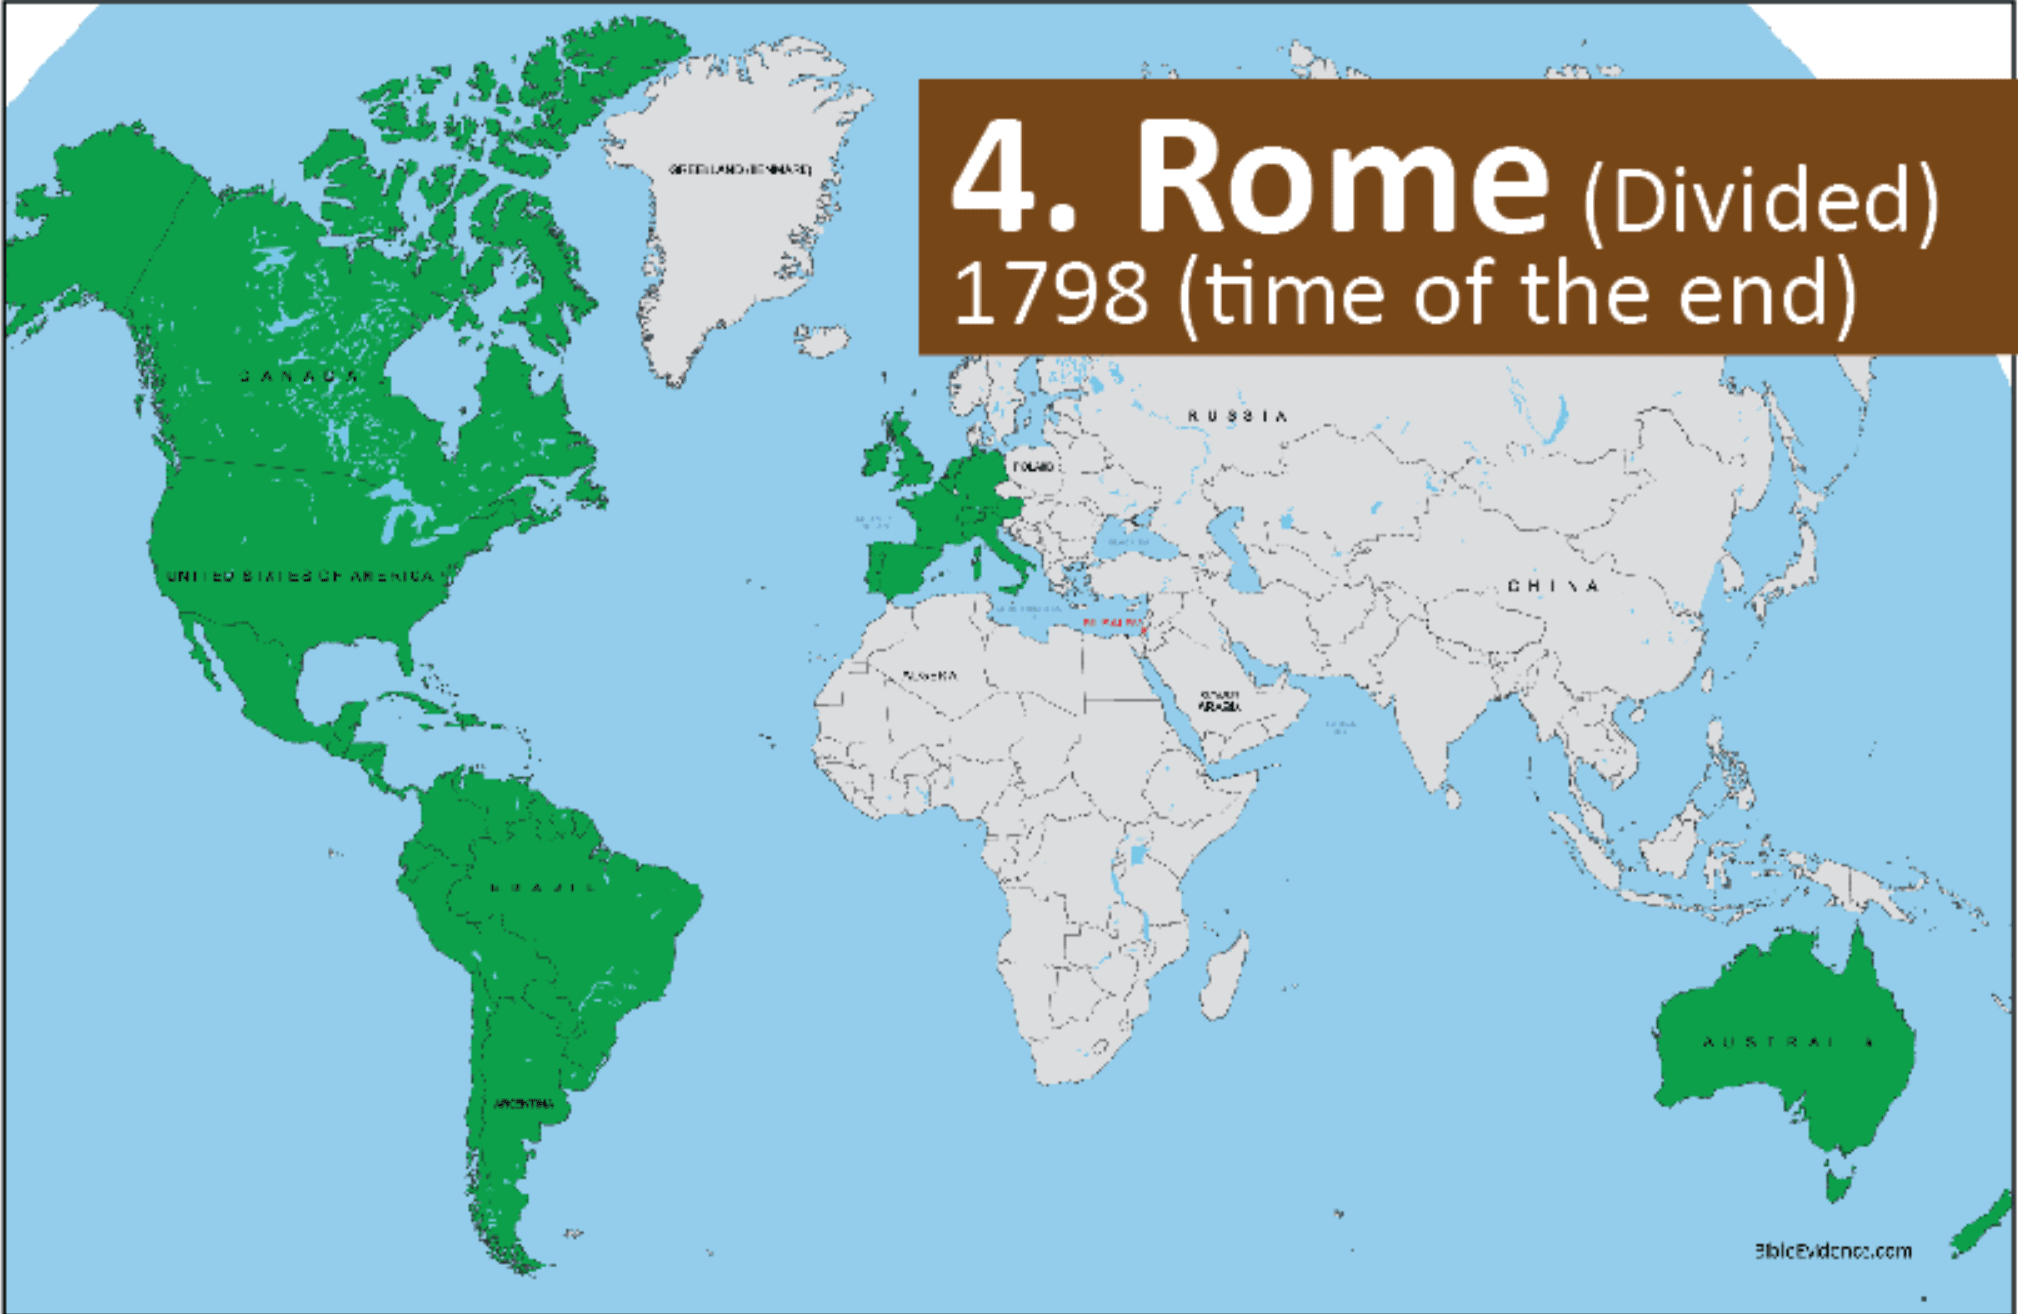 Rome Time of End Map